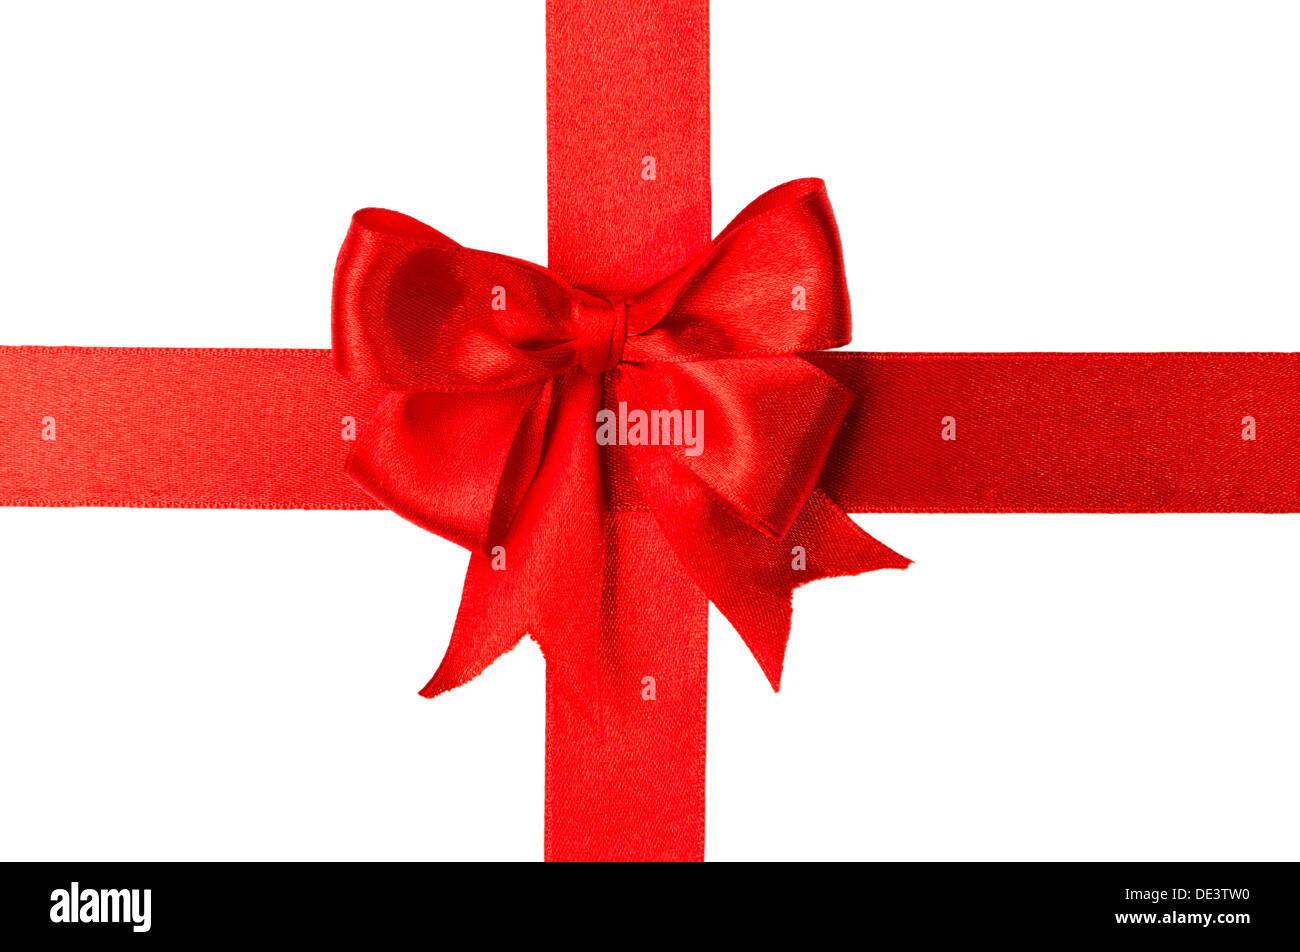 Curled Red Ribbon Banner Or Gift Tape For Holiday Celebration Or Discount  Sale Event Stock Illustration - Download Image Now - iStock